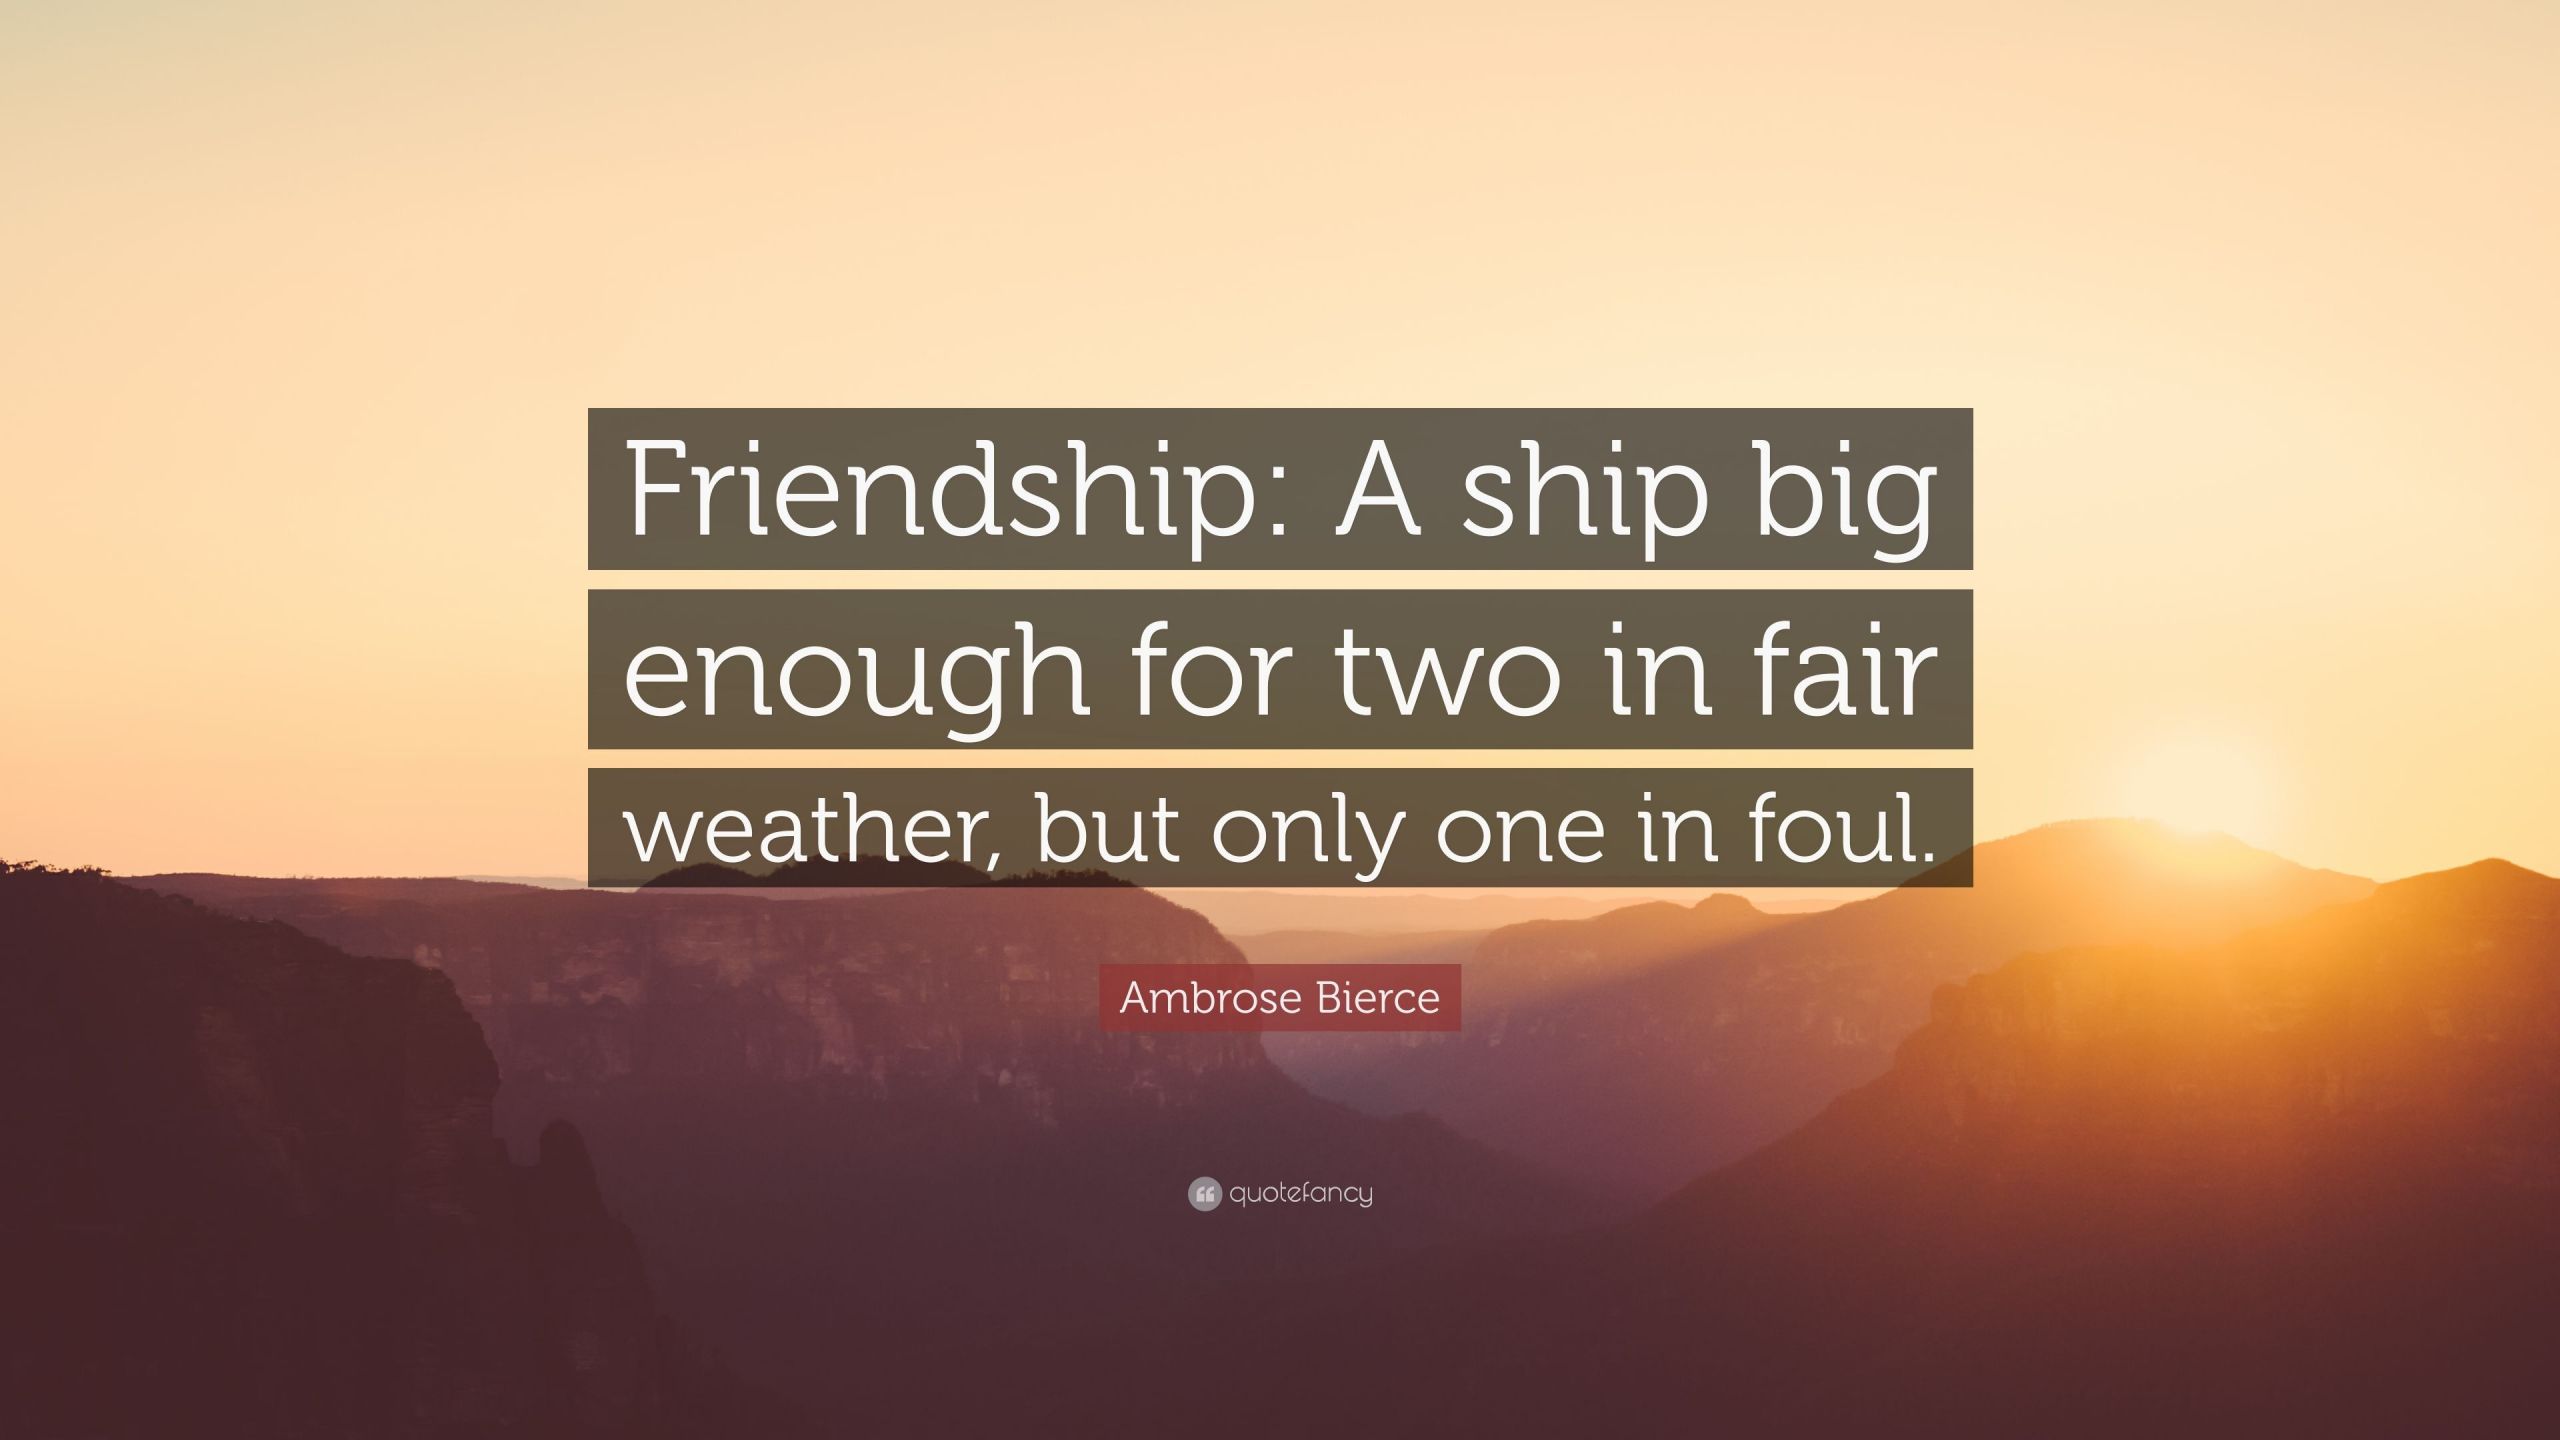 Quotes About Fair Weather Friendship
 Ambrose Bierce Quote “Friendship A ship big enough for